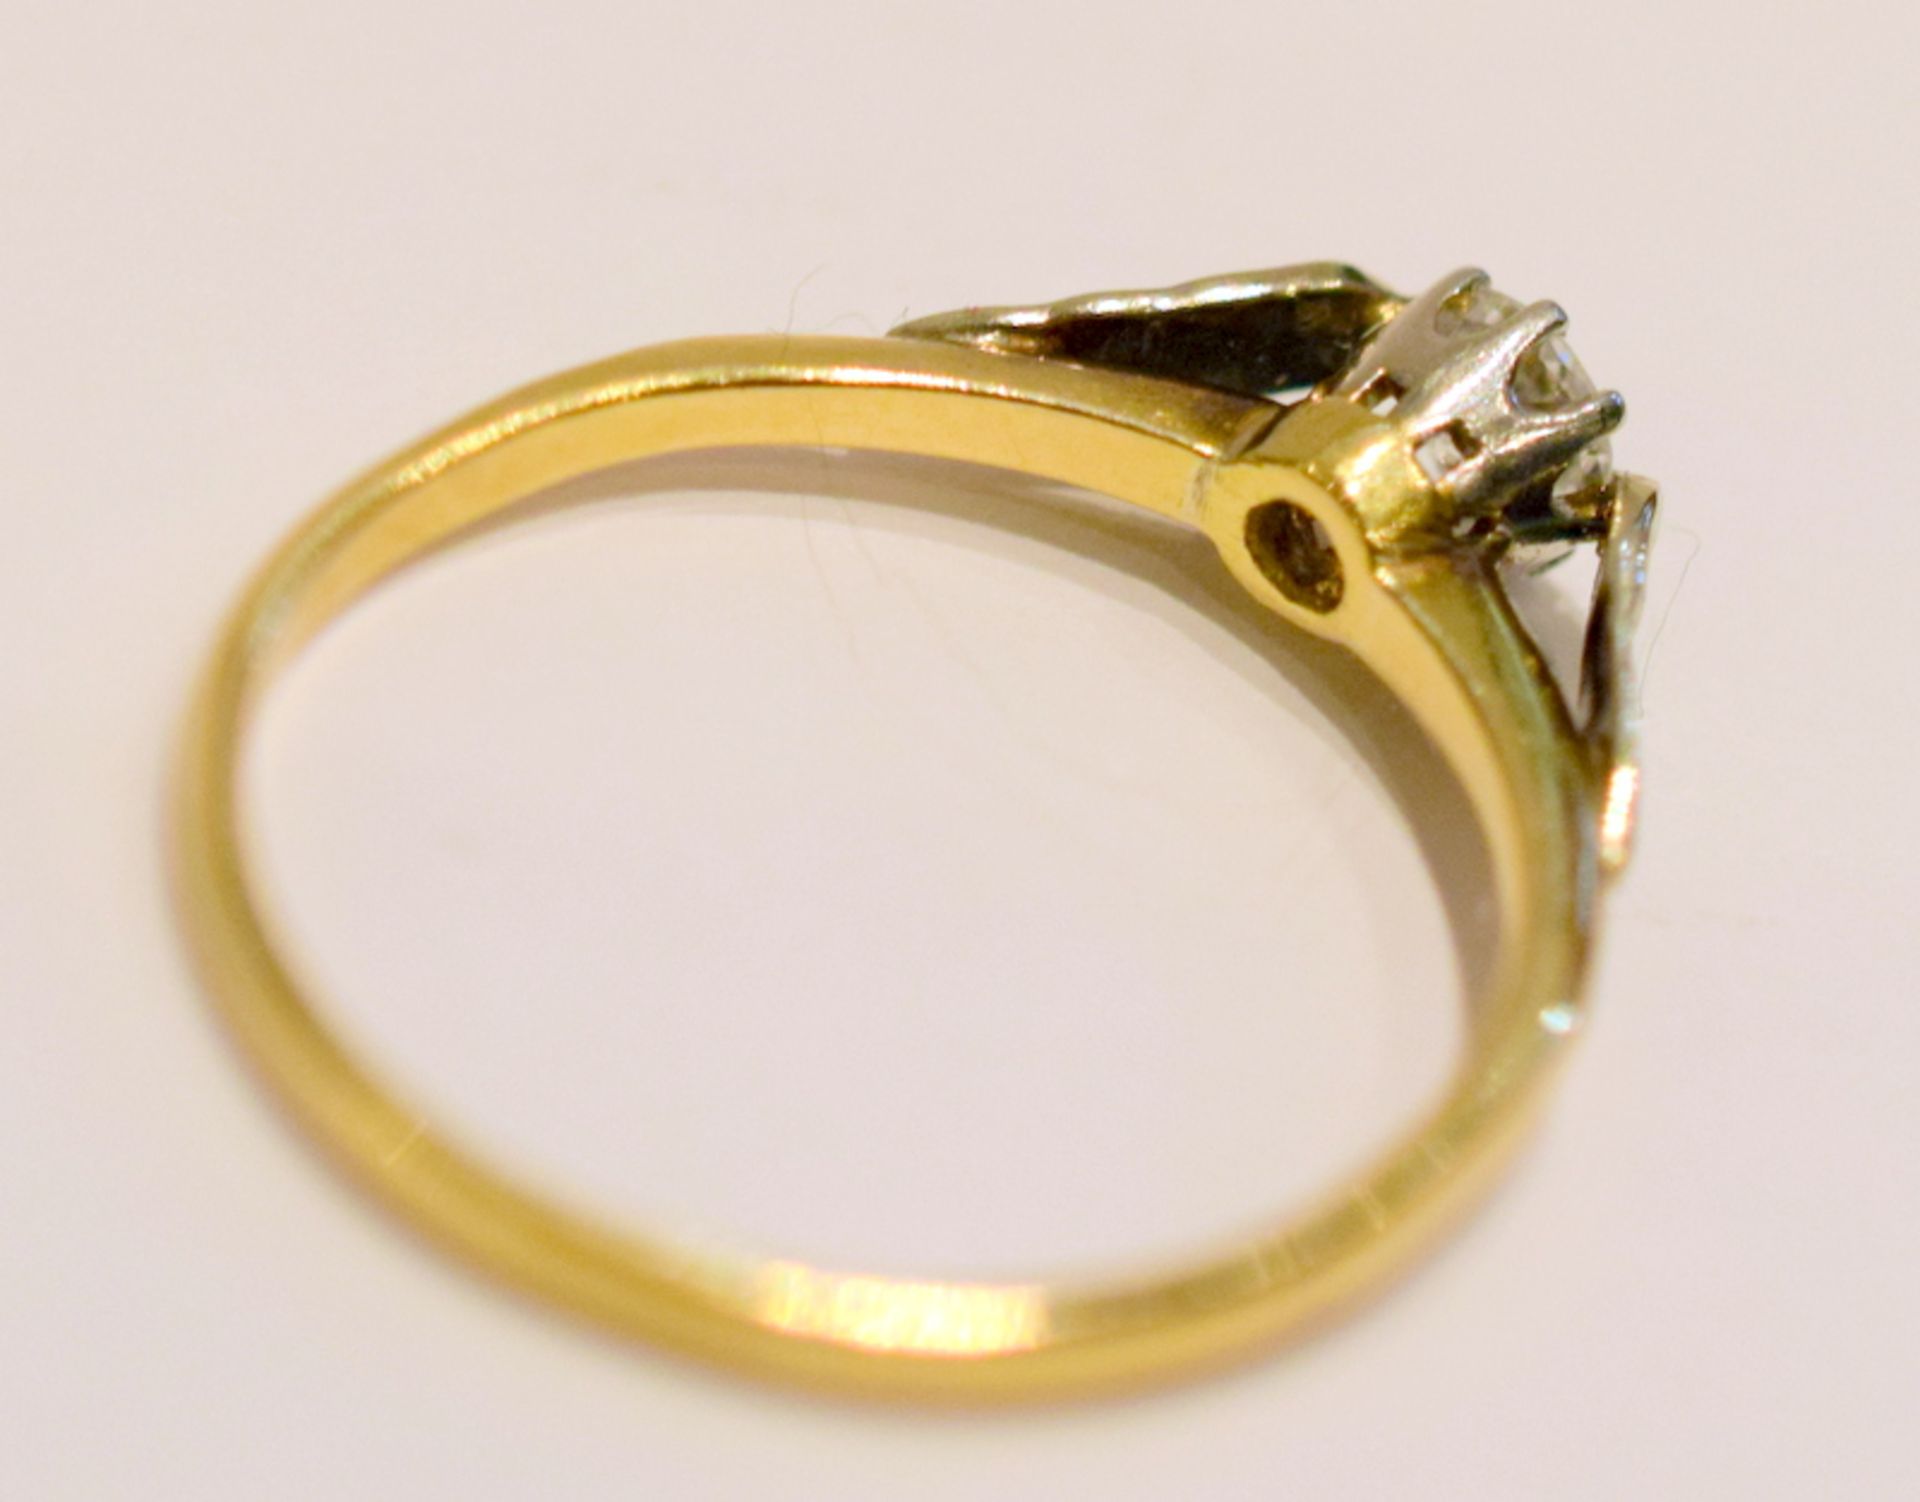 Lady's 18ct Solitaire Diamond Ring - Image 5 of 7